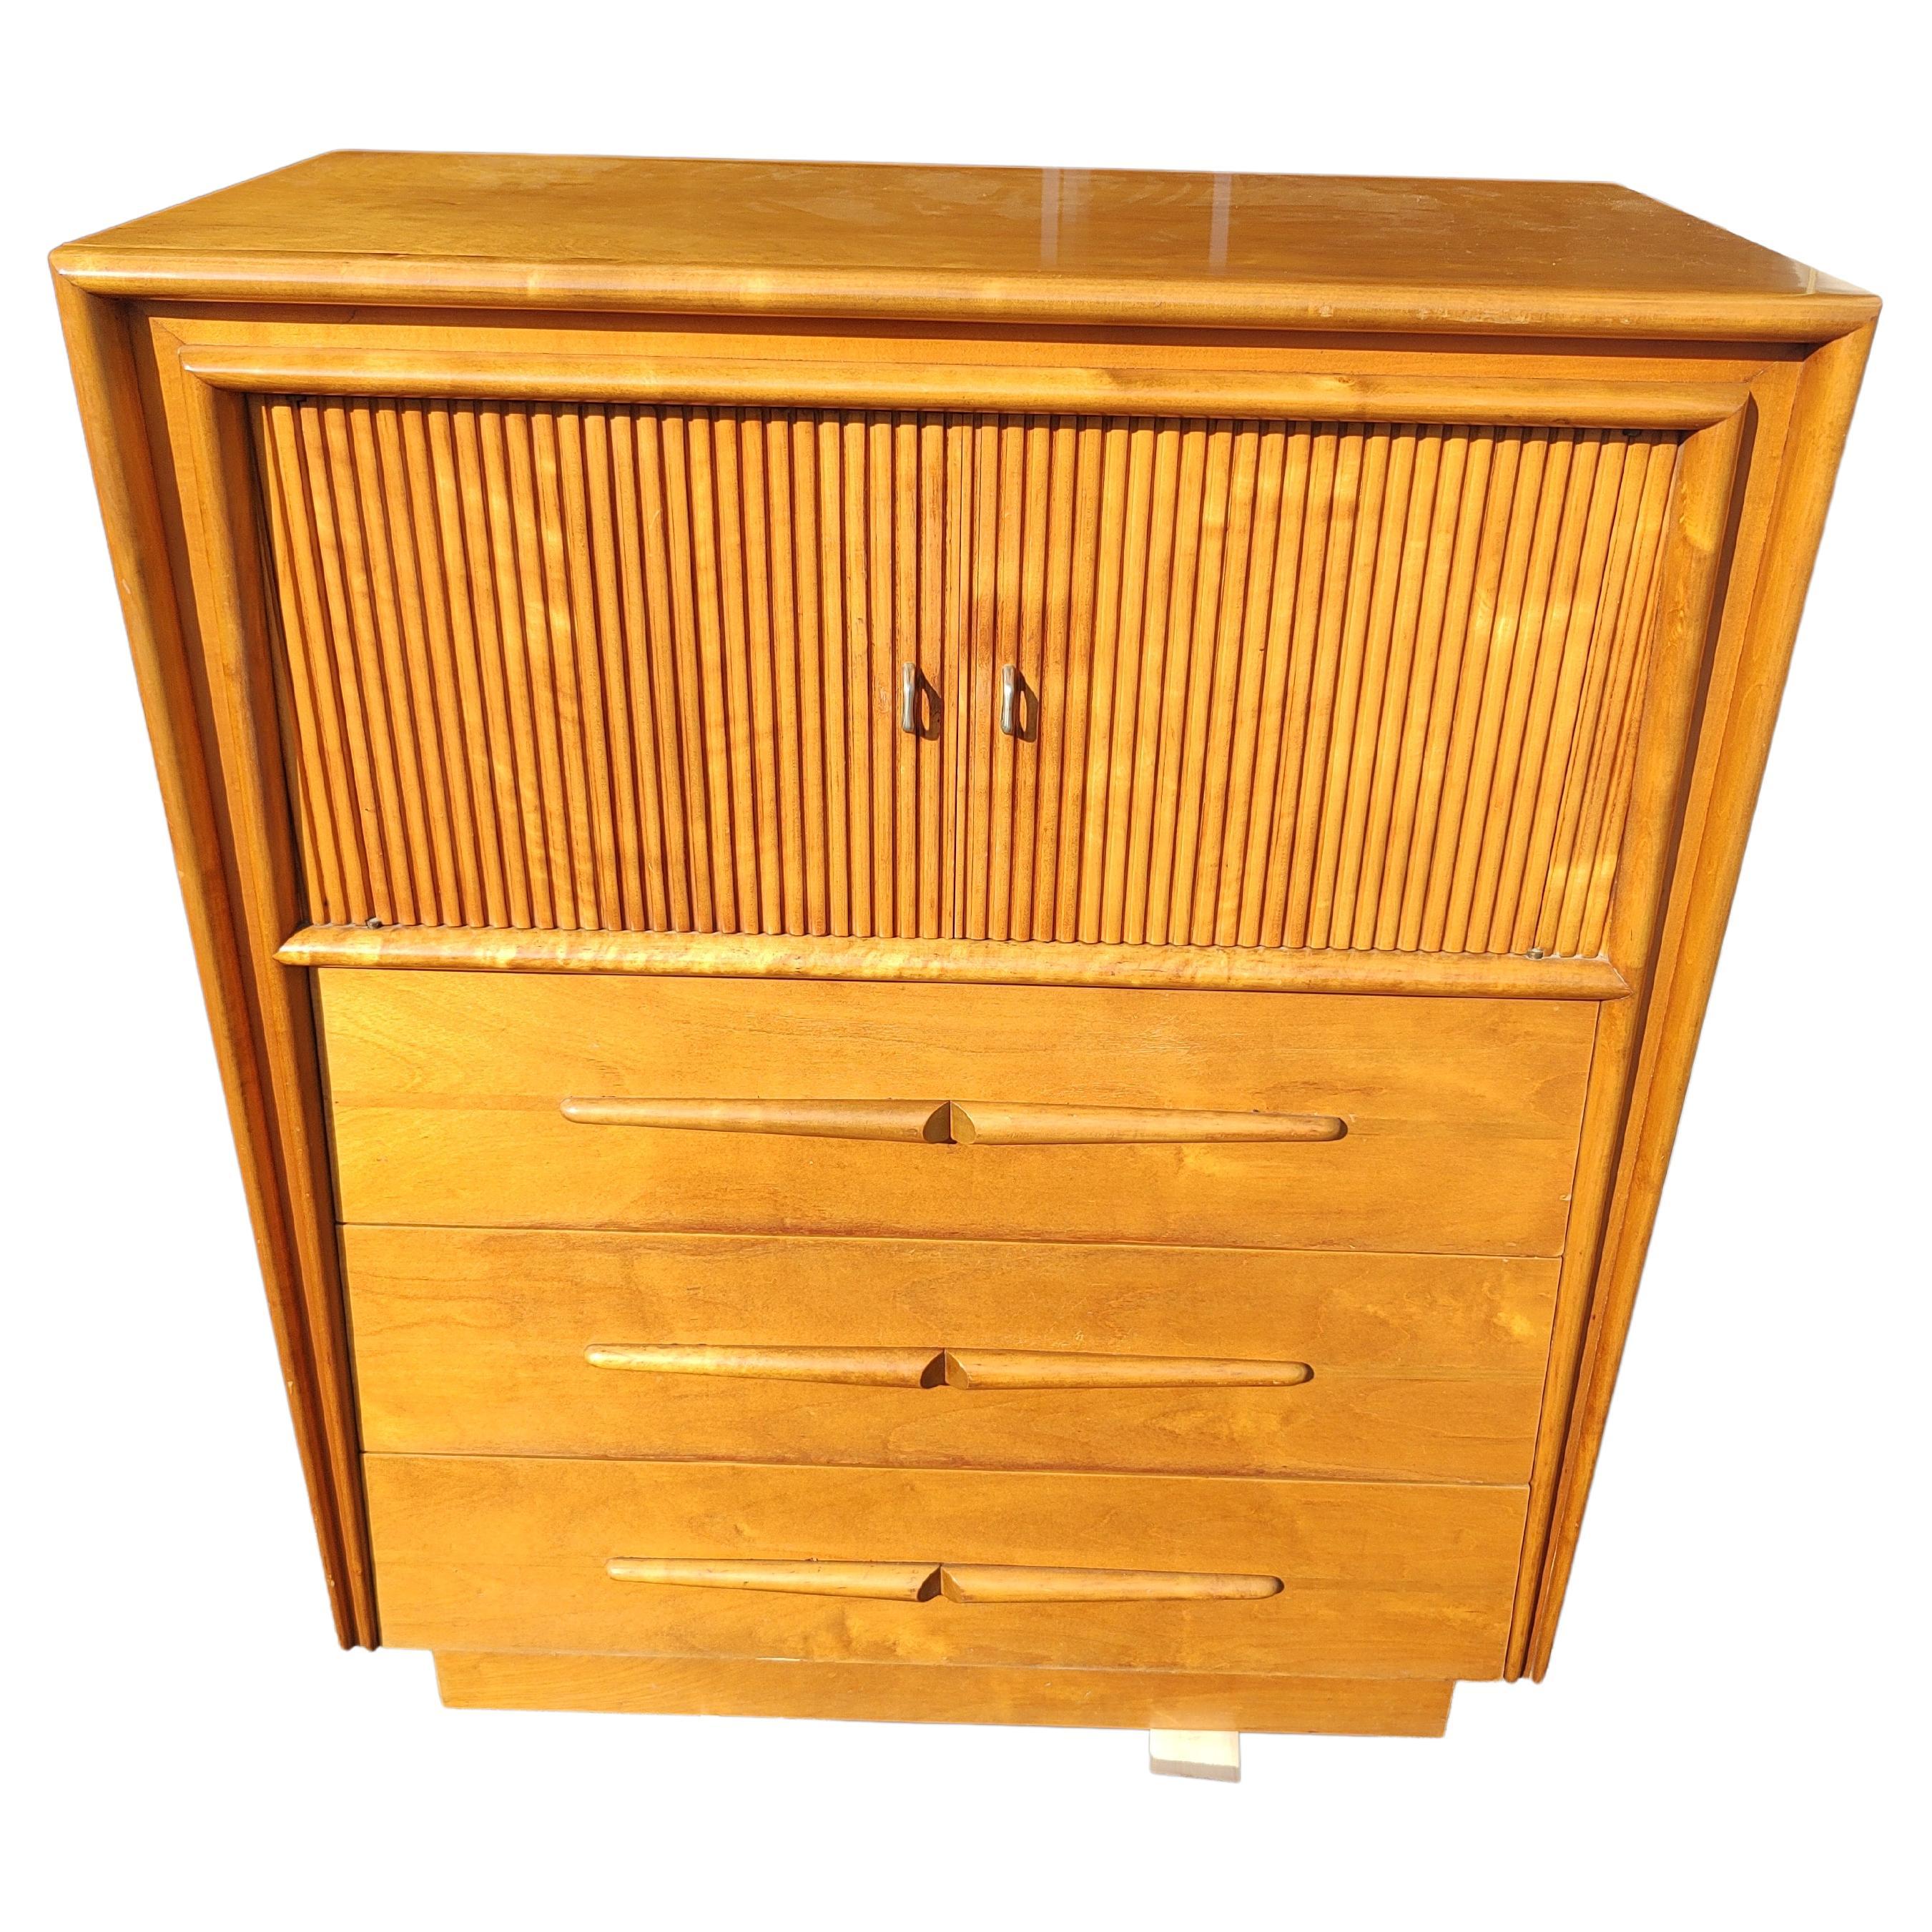 Mid Century Scandinavian Modern Dresser by Edmond Spence Sweden C1953 In Good Condition For Sale In Port Jervis, NY